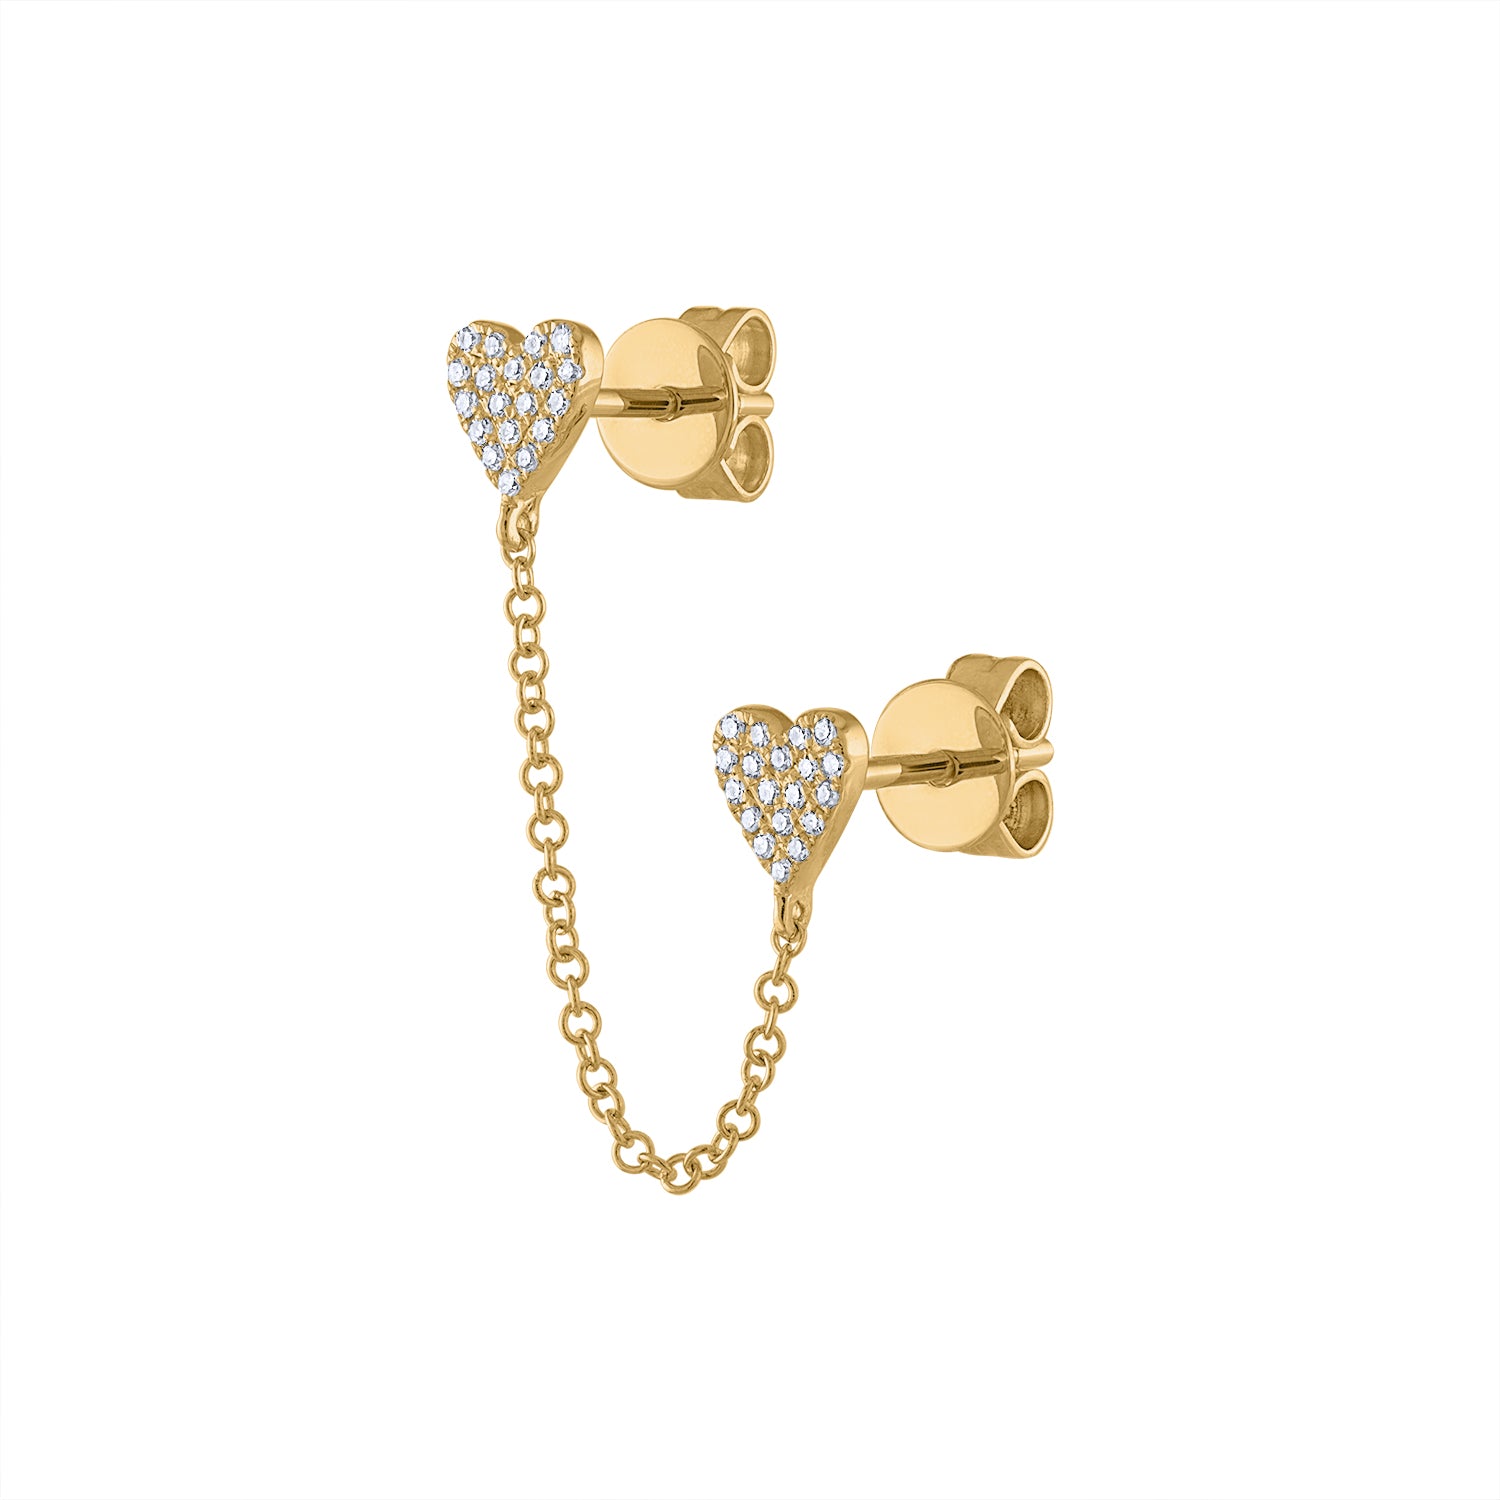 Safety Pin Chain Earring - Sia Link | Ana Luisa | Online Jewelry Store At  Prices You'll Love